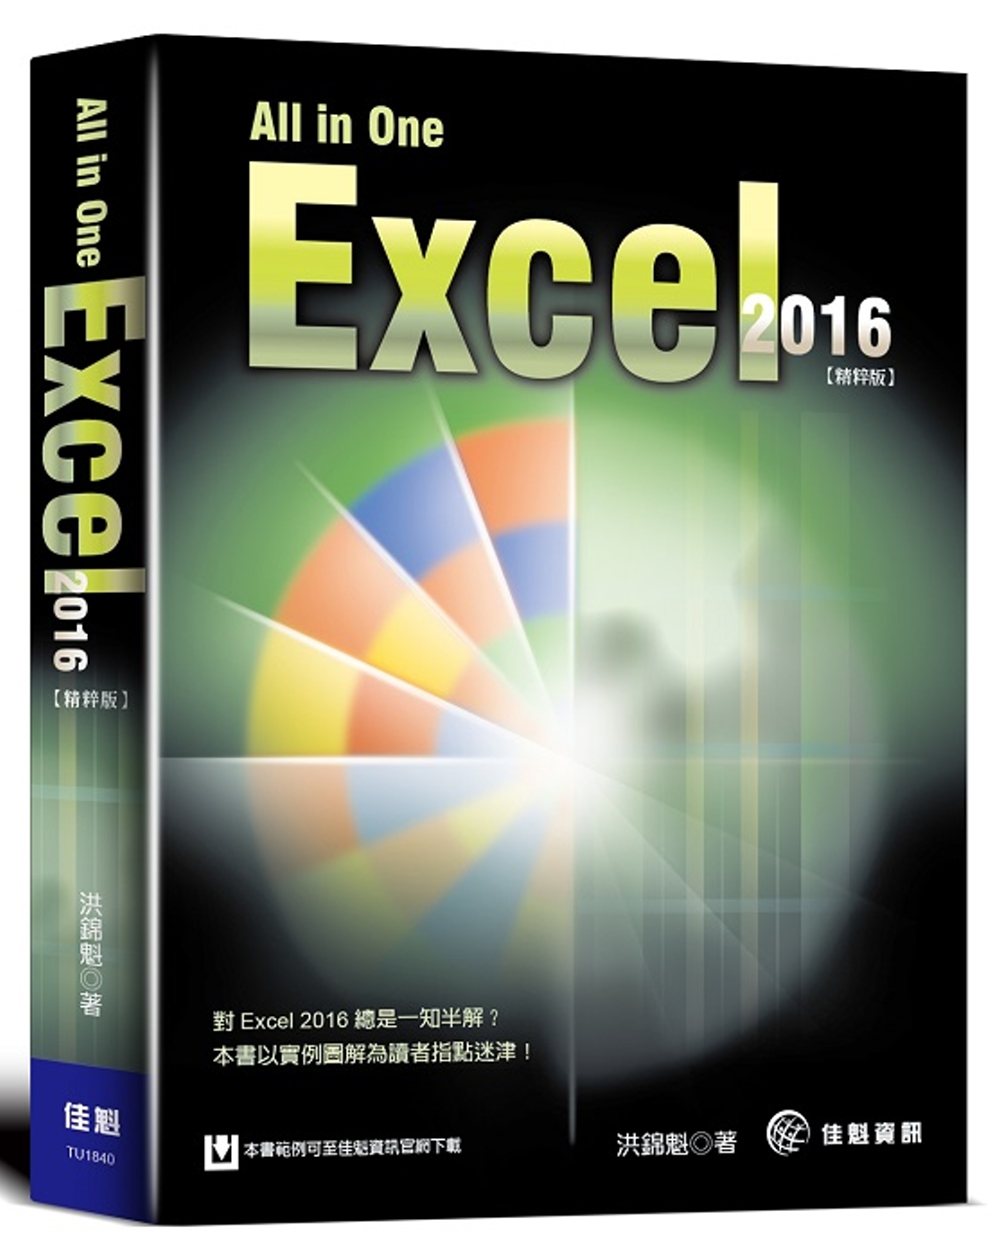 All in One：Excel 2016 精粹版